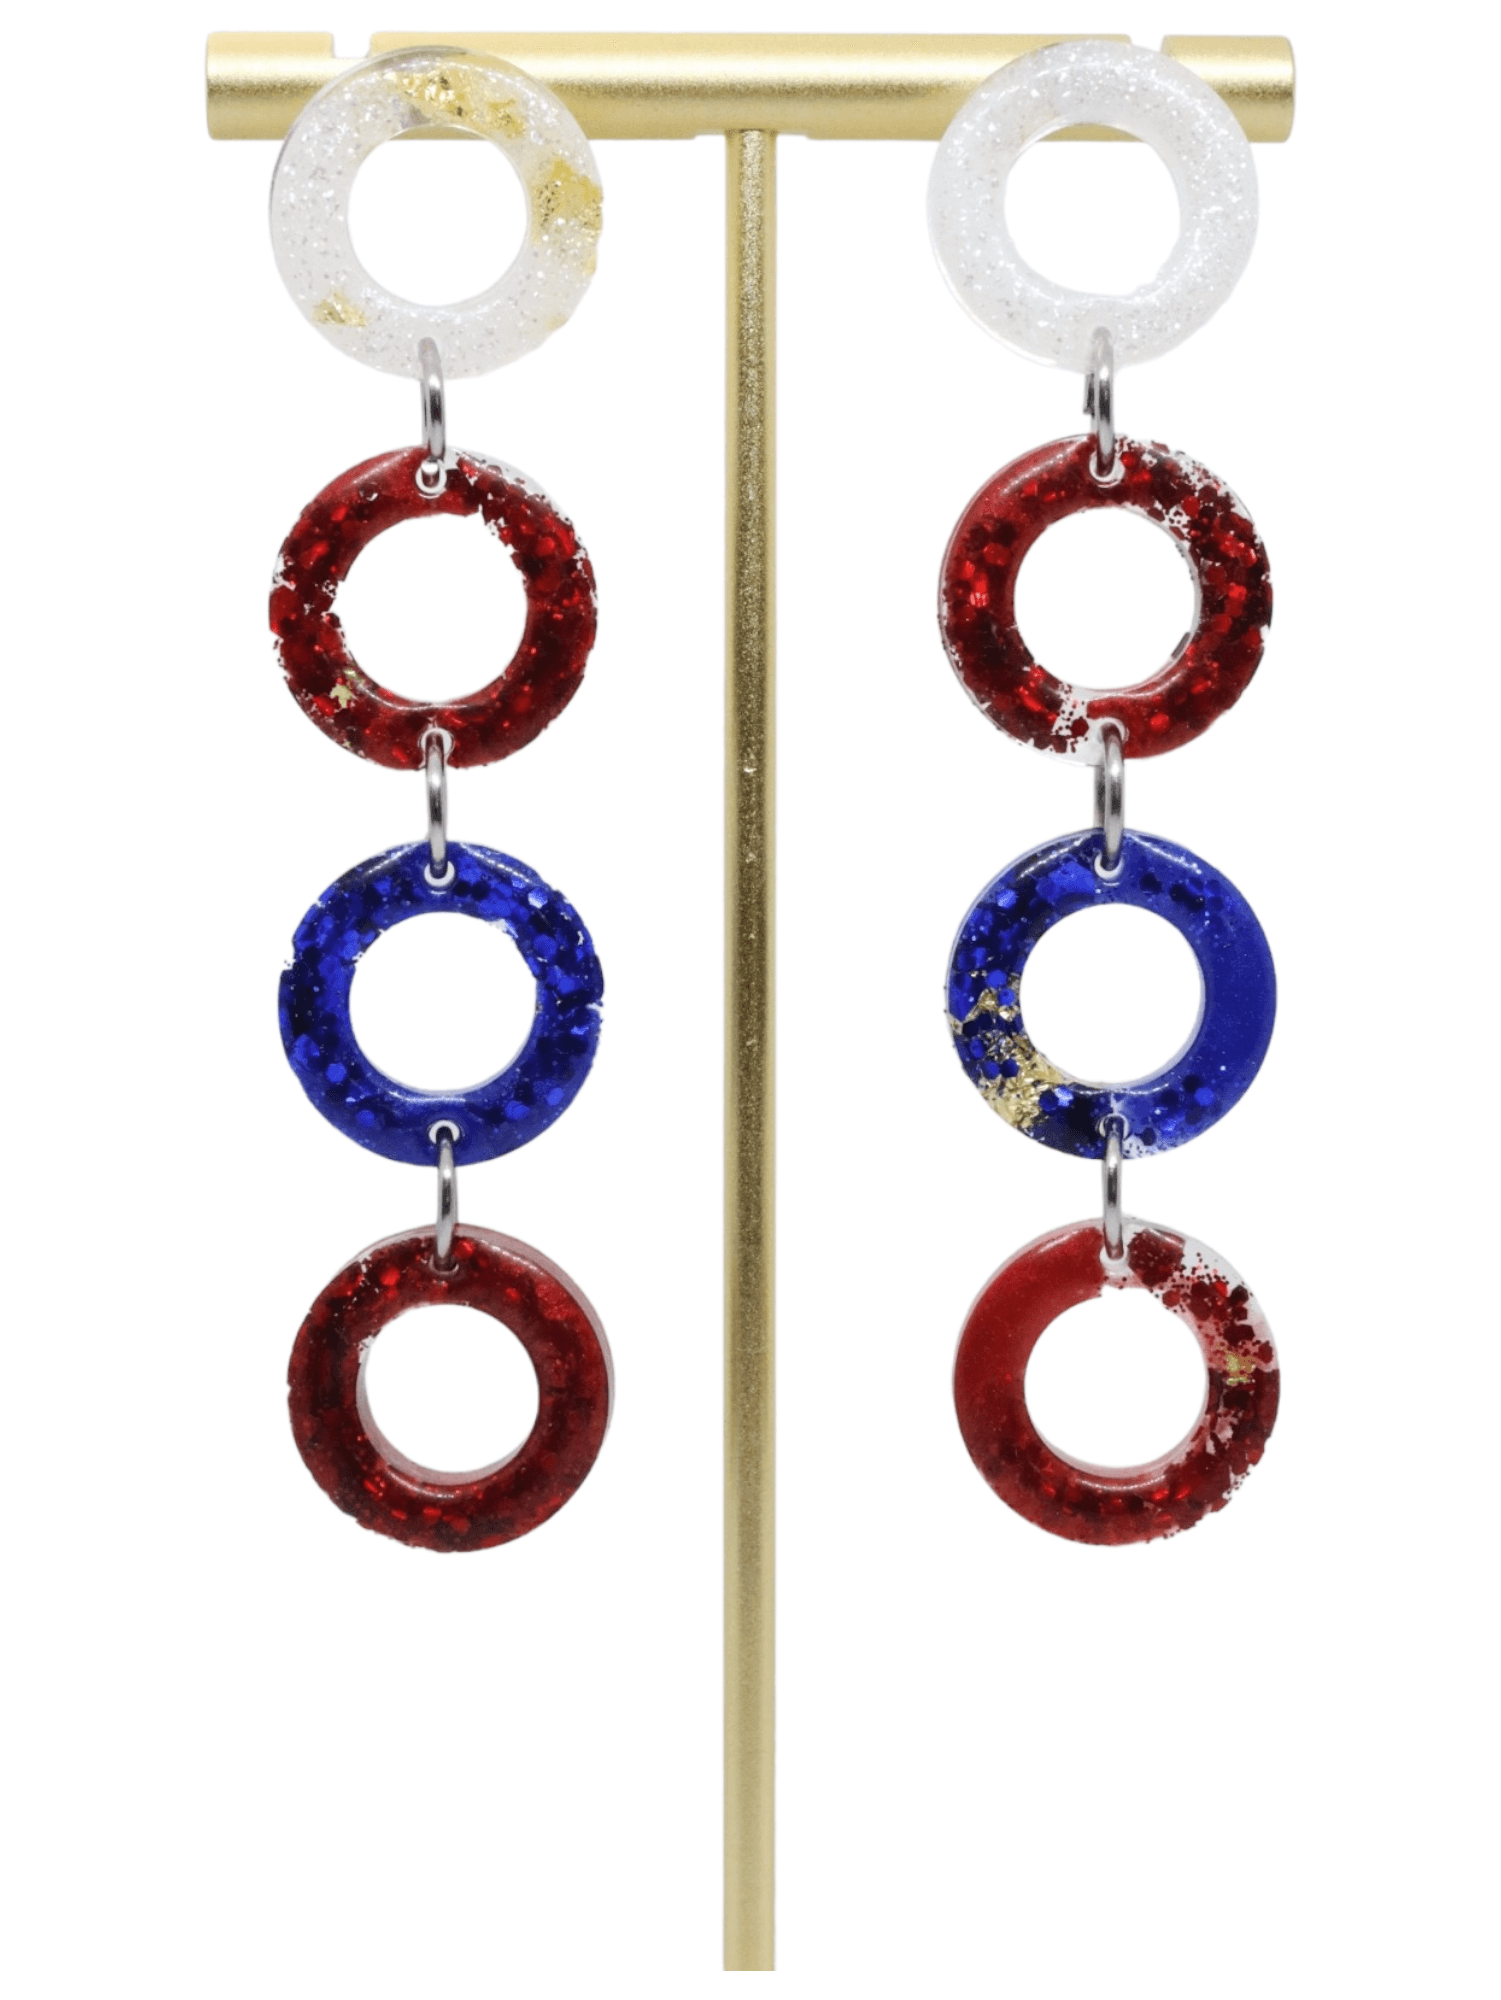 long-patriotic-chain-resin-earrings---stud-earrings-hypoallergenic---red-white-and-blue-earrings---kaleidoscopes-and-polka-dots